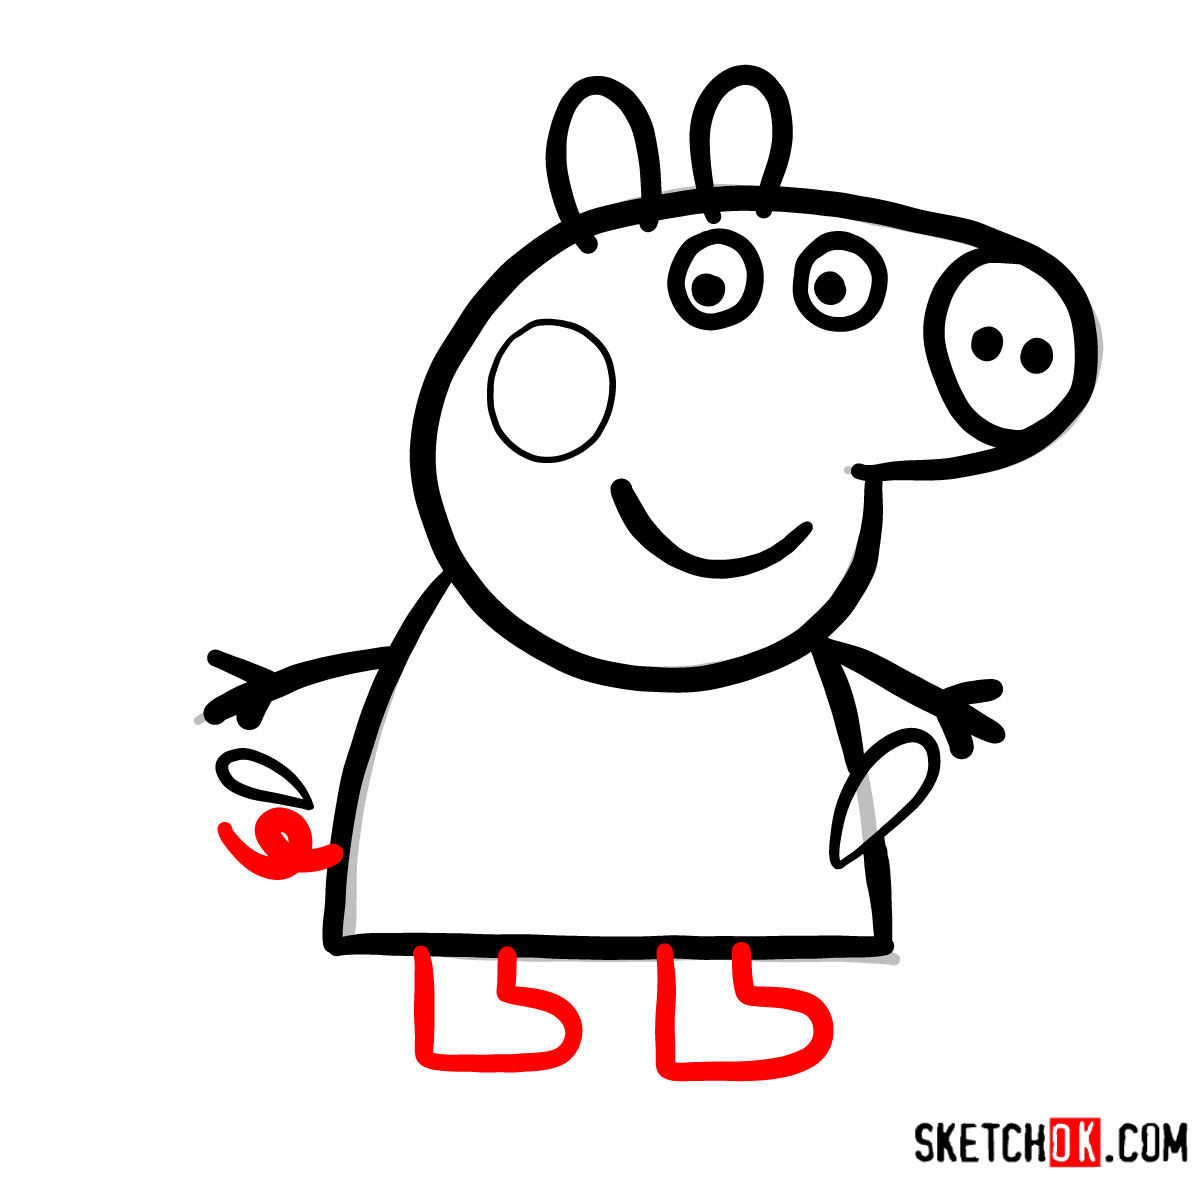 How to draw Peppa Pig in the mud puddle - step 07